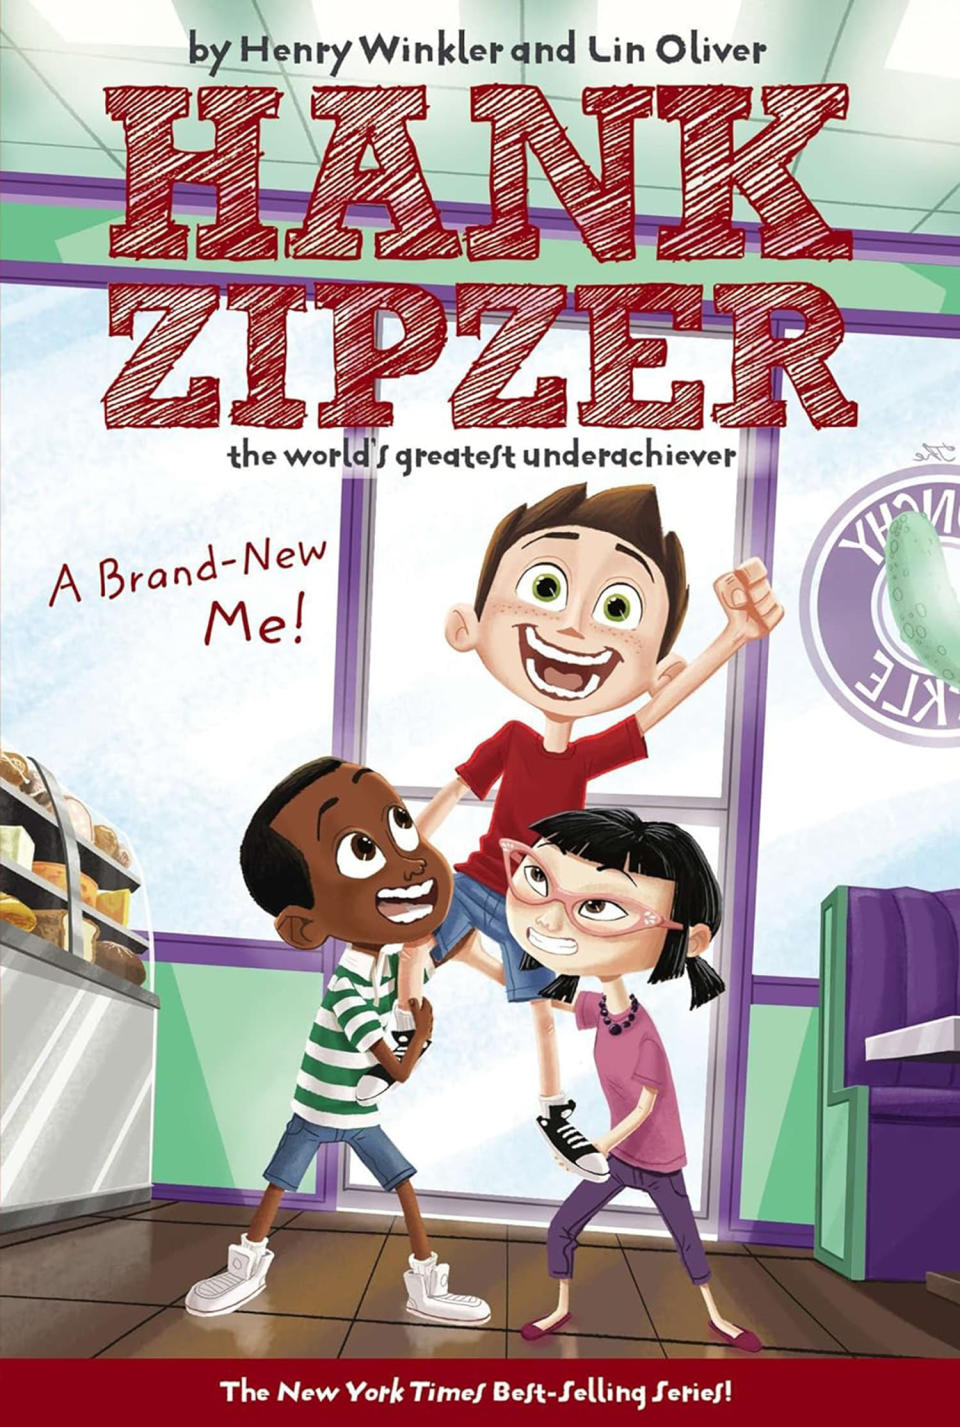 Winkler's children's book series is inspired by his real-life story. (Amazon)